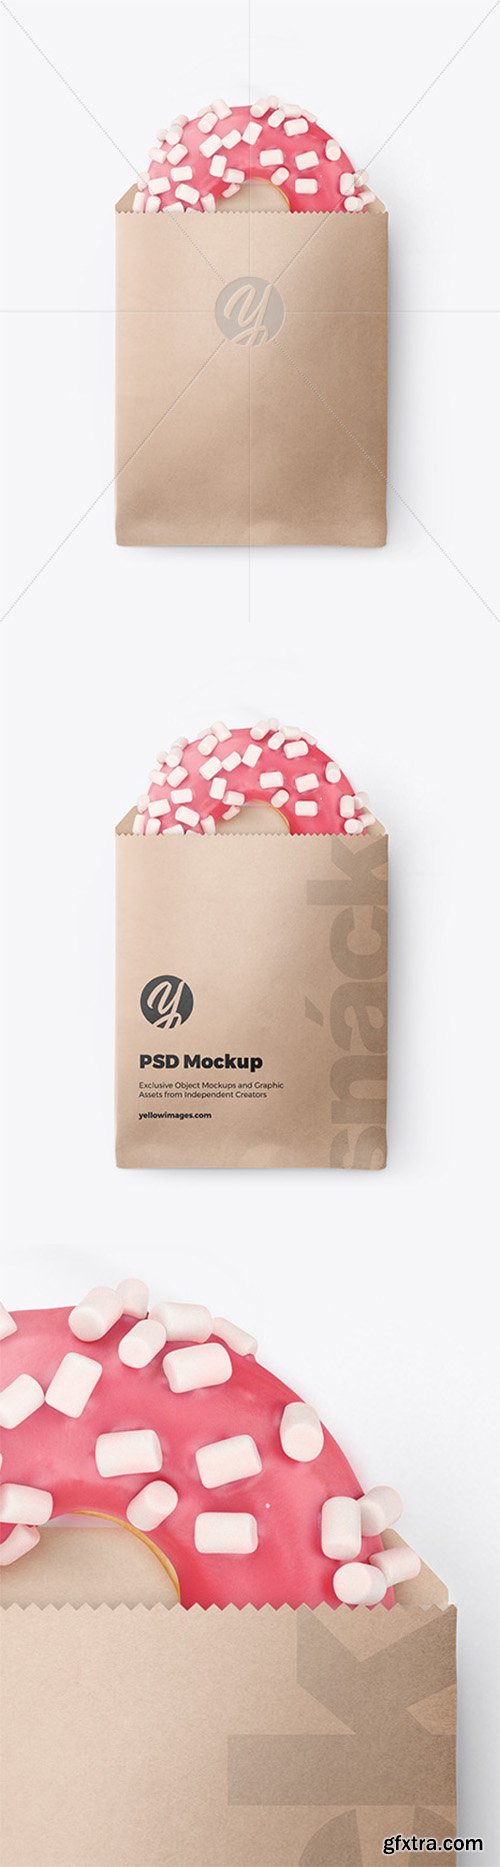 Old Paper Mockup Psd Download Free And Premium Psd Mockup Templates And Design Assets